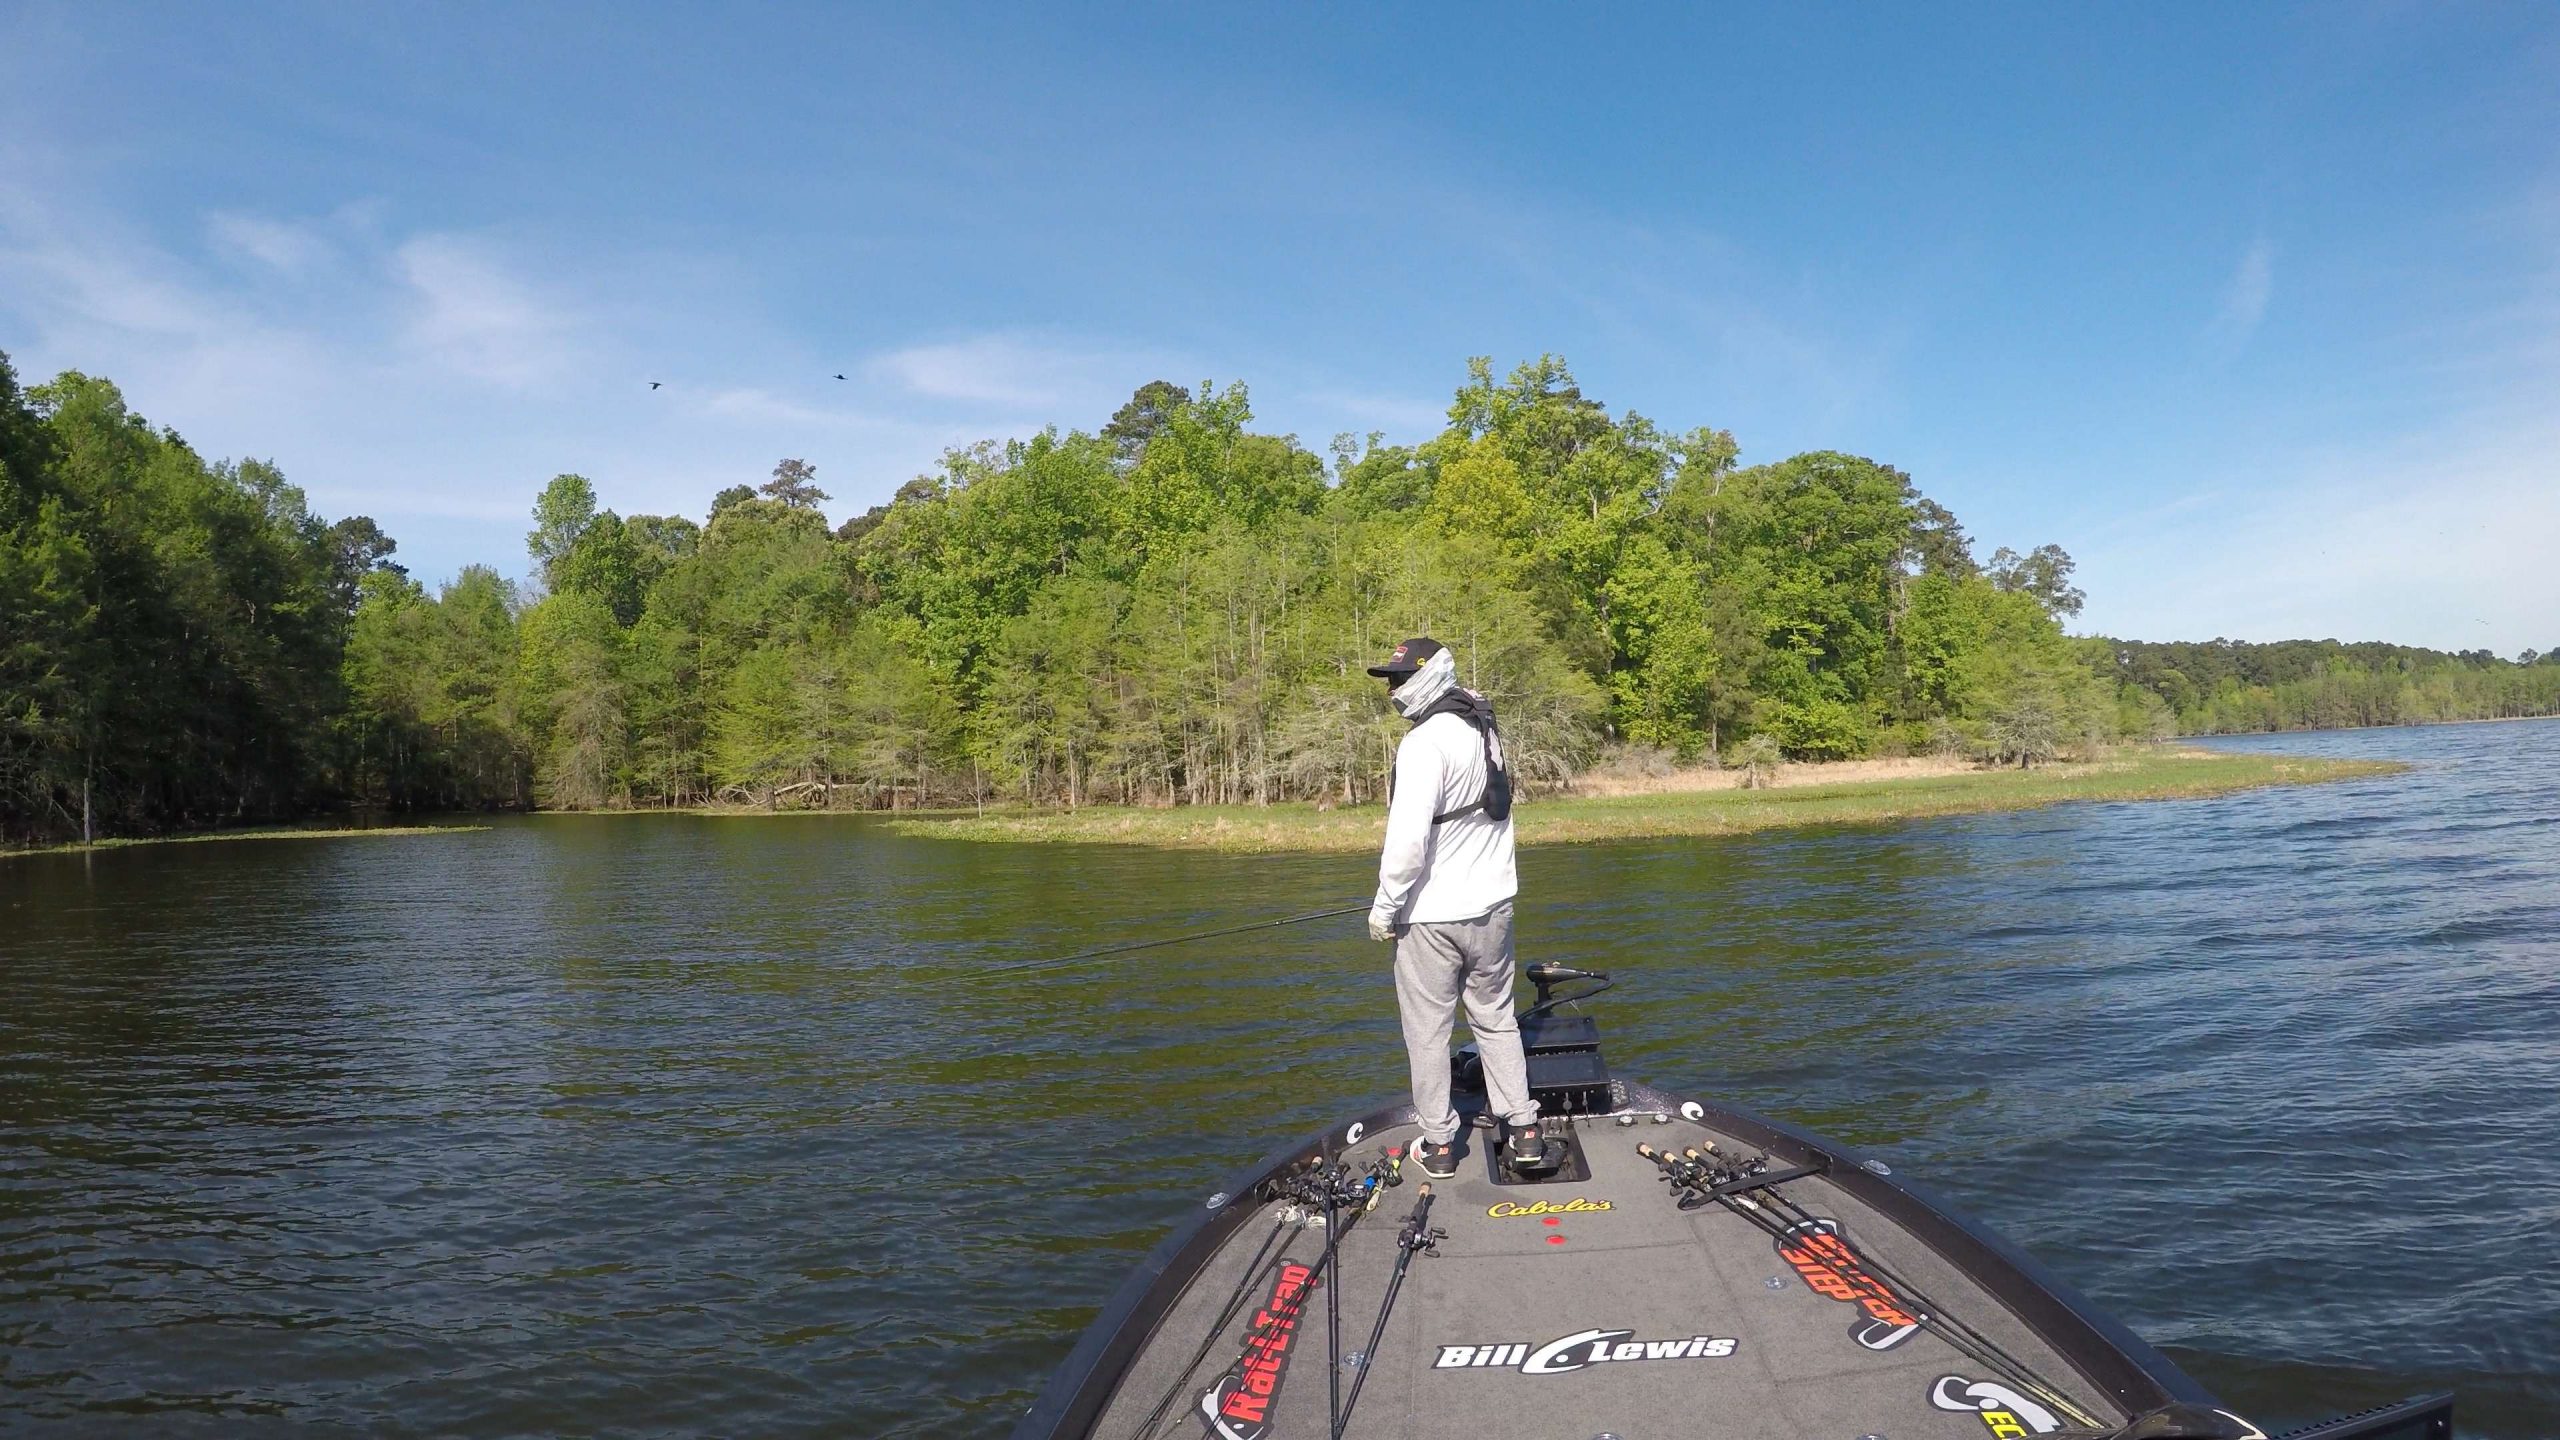 After a disappointing morning on the shad spawn, and only one fish in an area that has produced for him this week, Mark has called an audible an made a long run in hopes to find fish. Stay tuned.